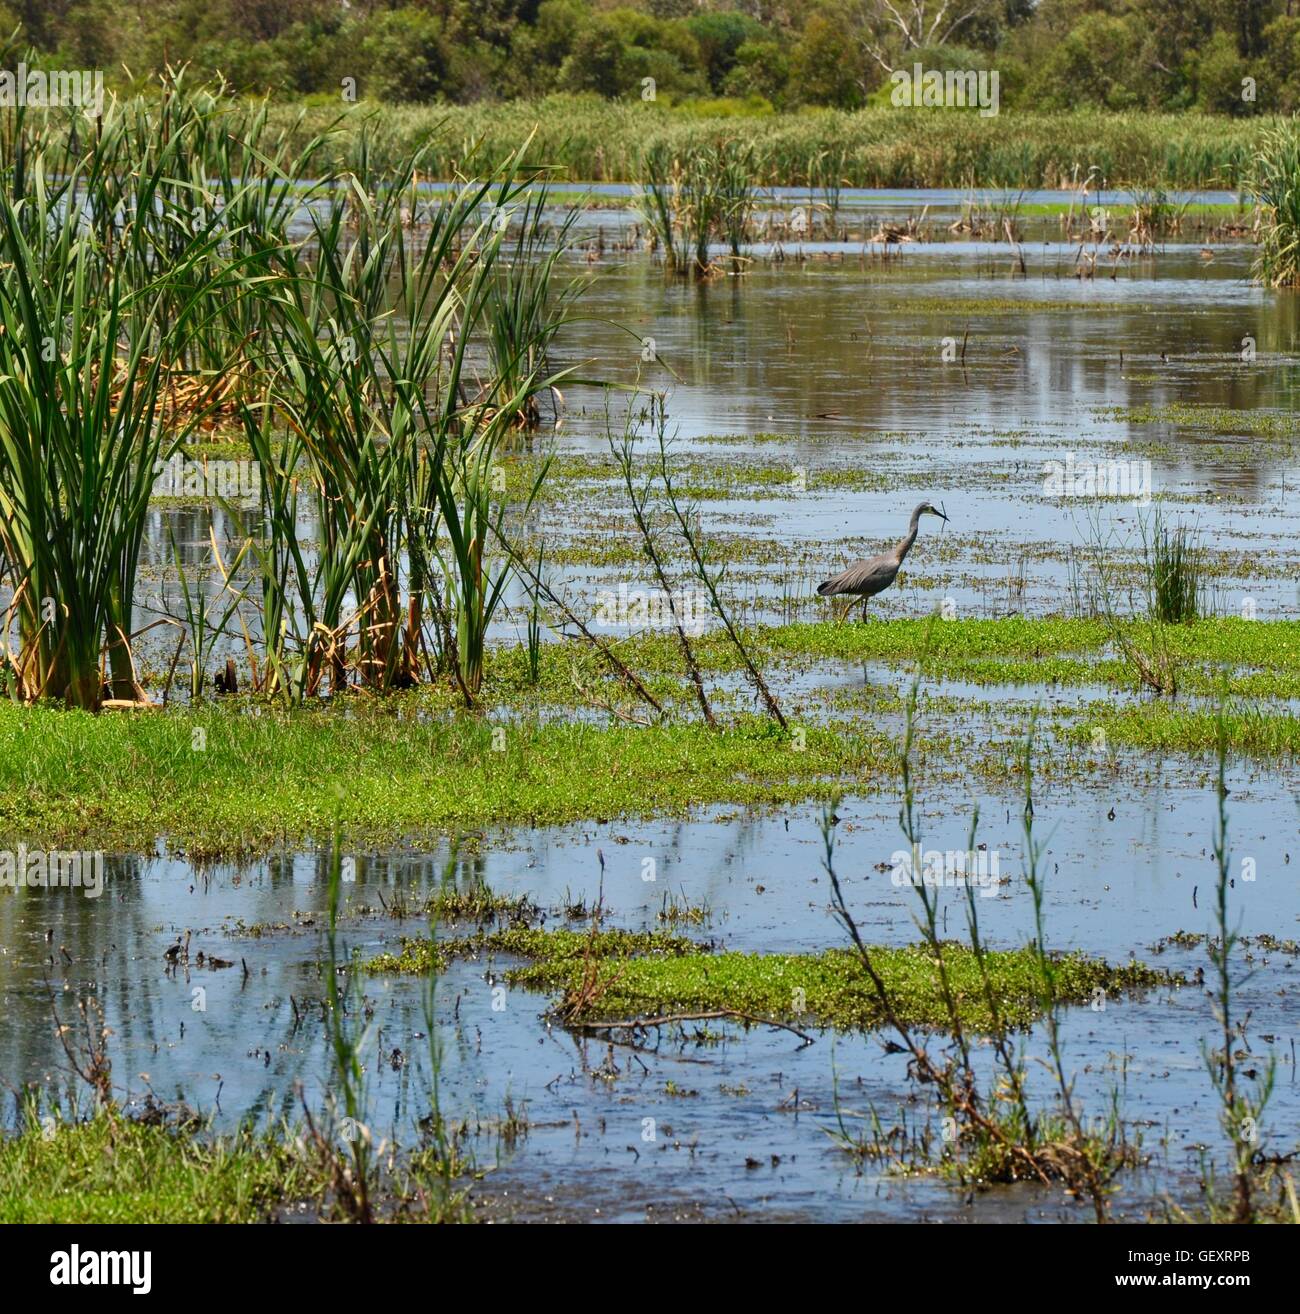 White-faced grey heron wading in the mudflats and reeds at the Beelier Wetlands in Bibra Lake, Western Australia. Stock Photo